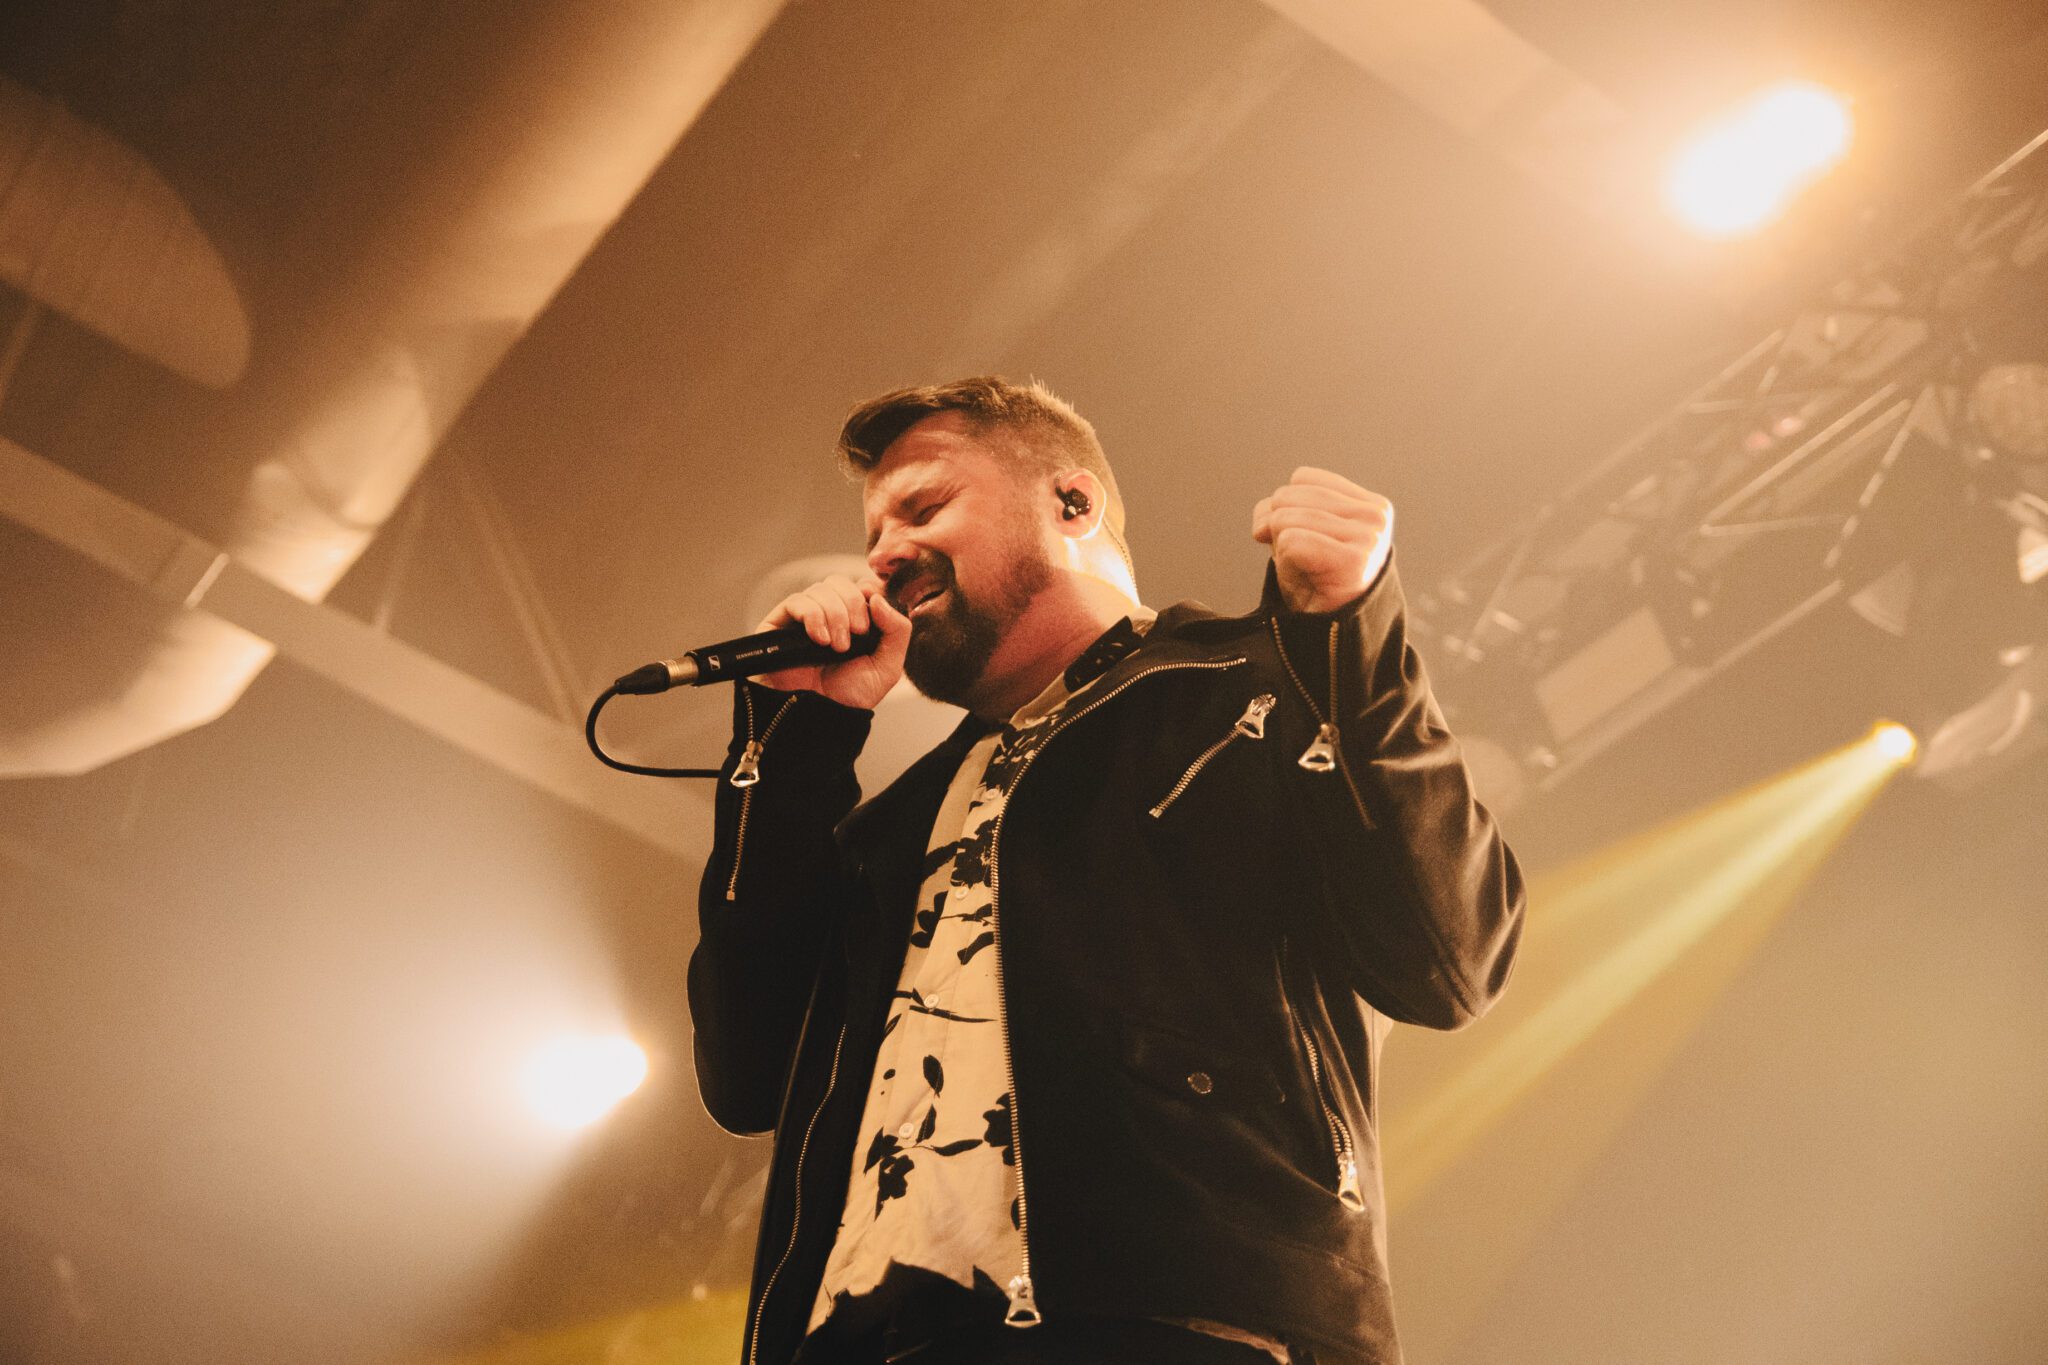 Silverstein performing live at History in Toronto